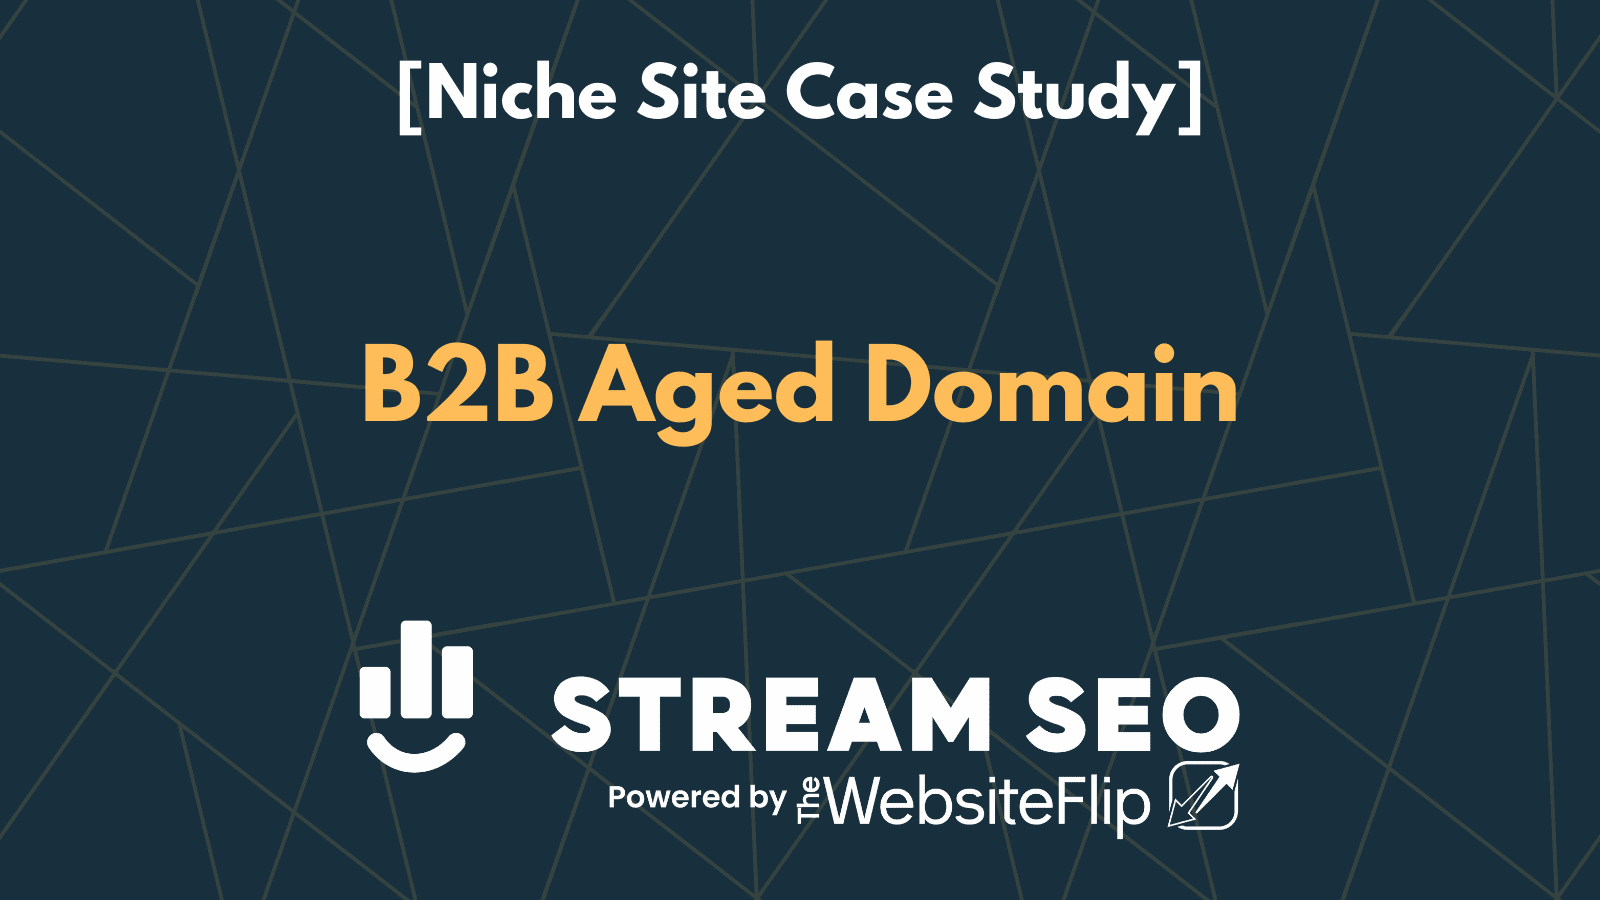 B2B Aged Domain Case Study: $780 Revenue in Month 1!